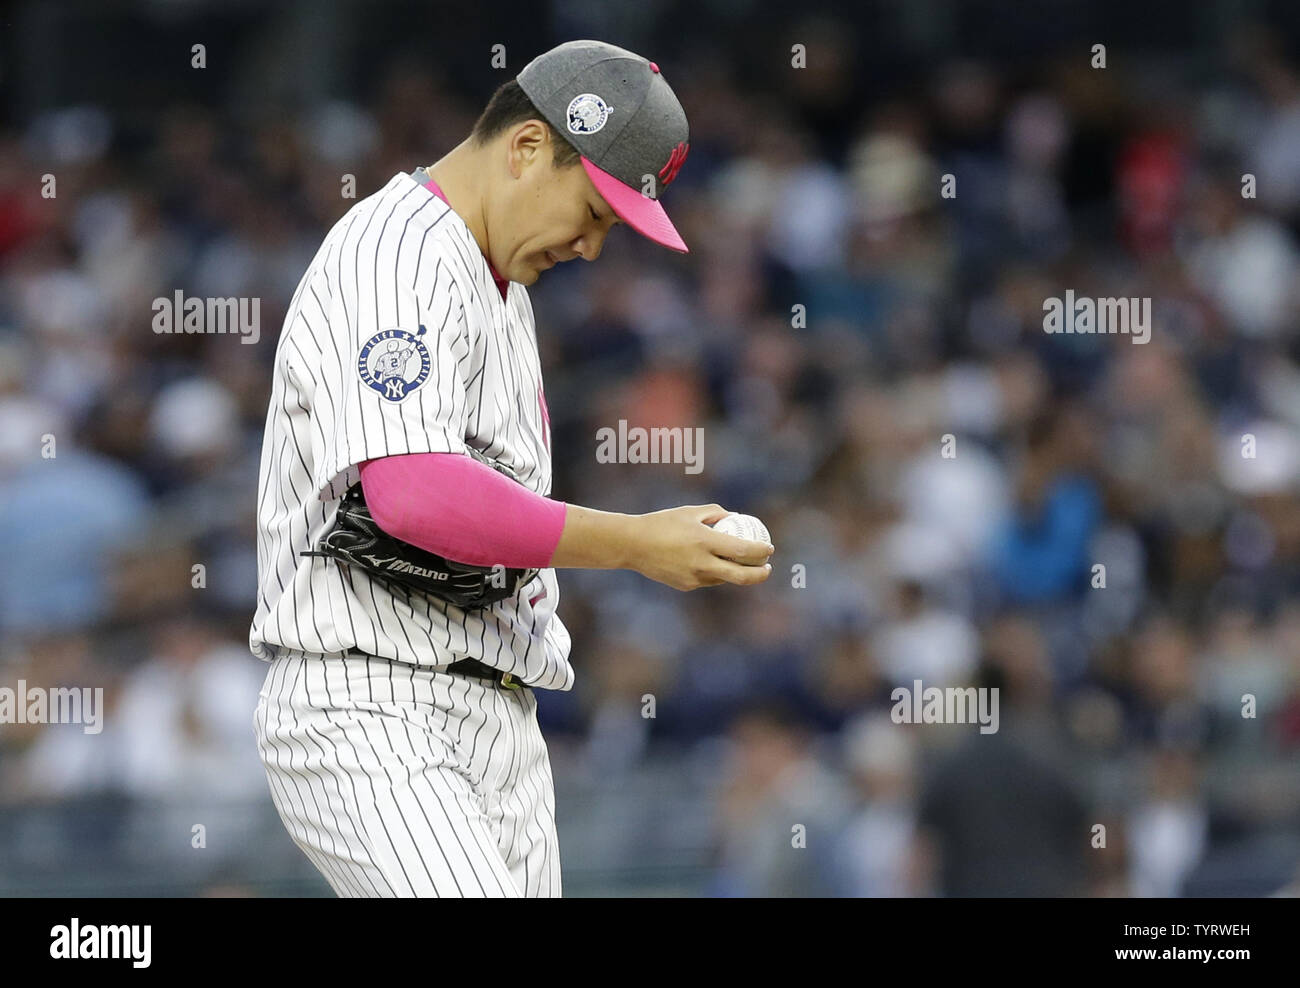 New York Yankees starting pitcher Masahiro Tanaka reacts after giving up a lead off home run to Houston Astros George Springer in the first inning at Yankee Stadium in New York City on May 14, 2017. The New York Yankees former shortstop Derek Jeter before the game had his No. 2 retired and was also honored with a plaque in Monument Park.     Photo by John Angelillo/UPI Stock Photo